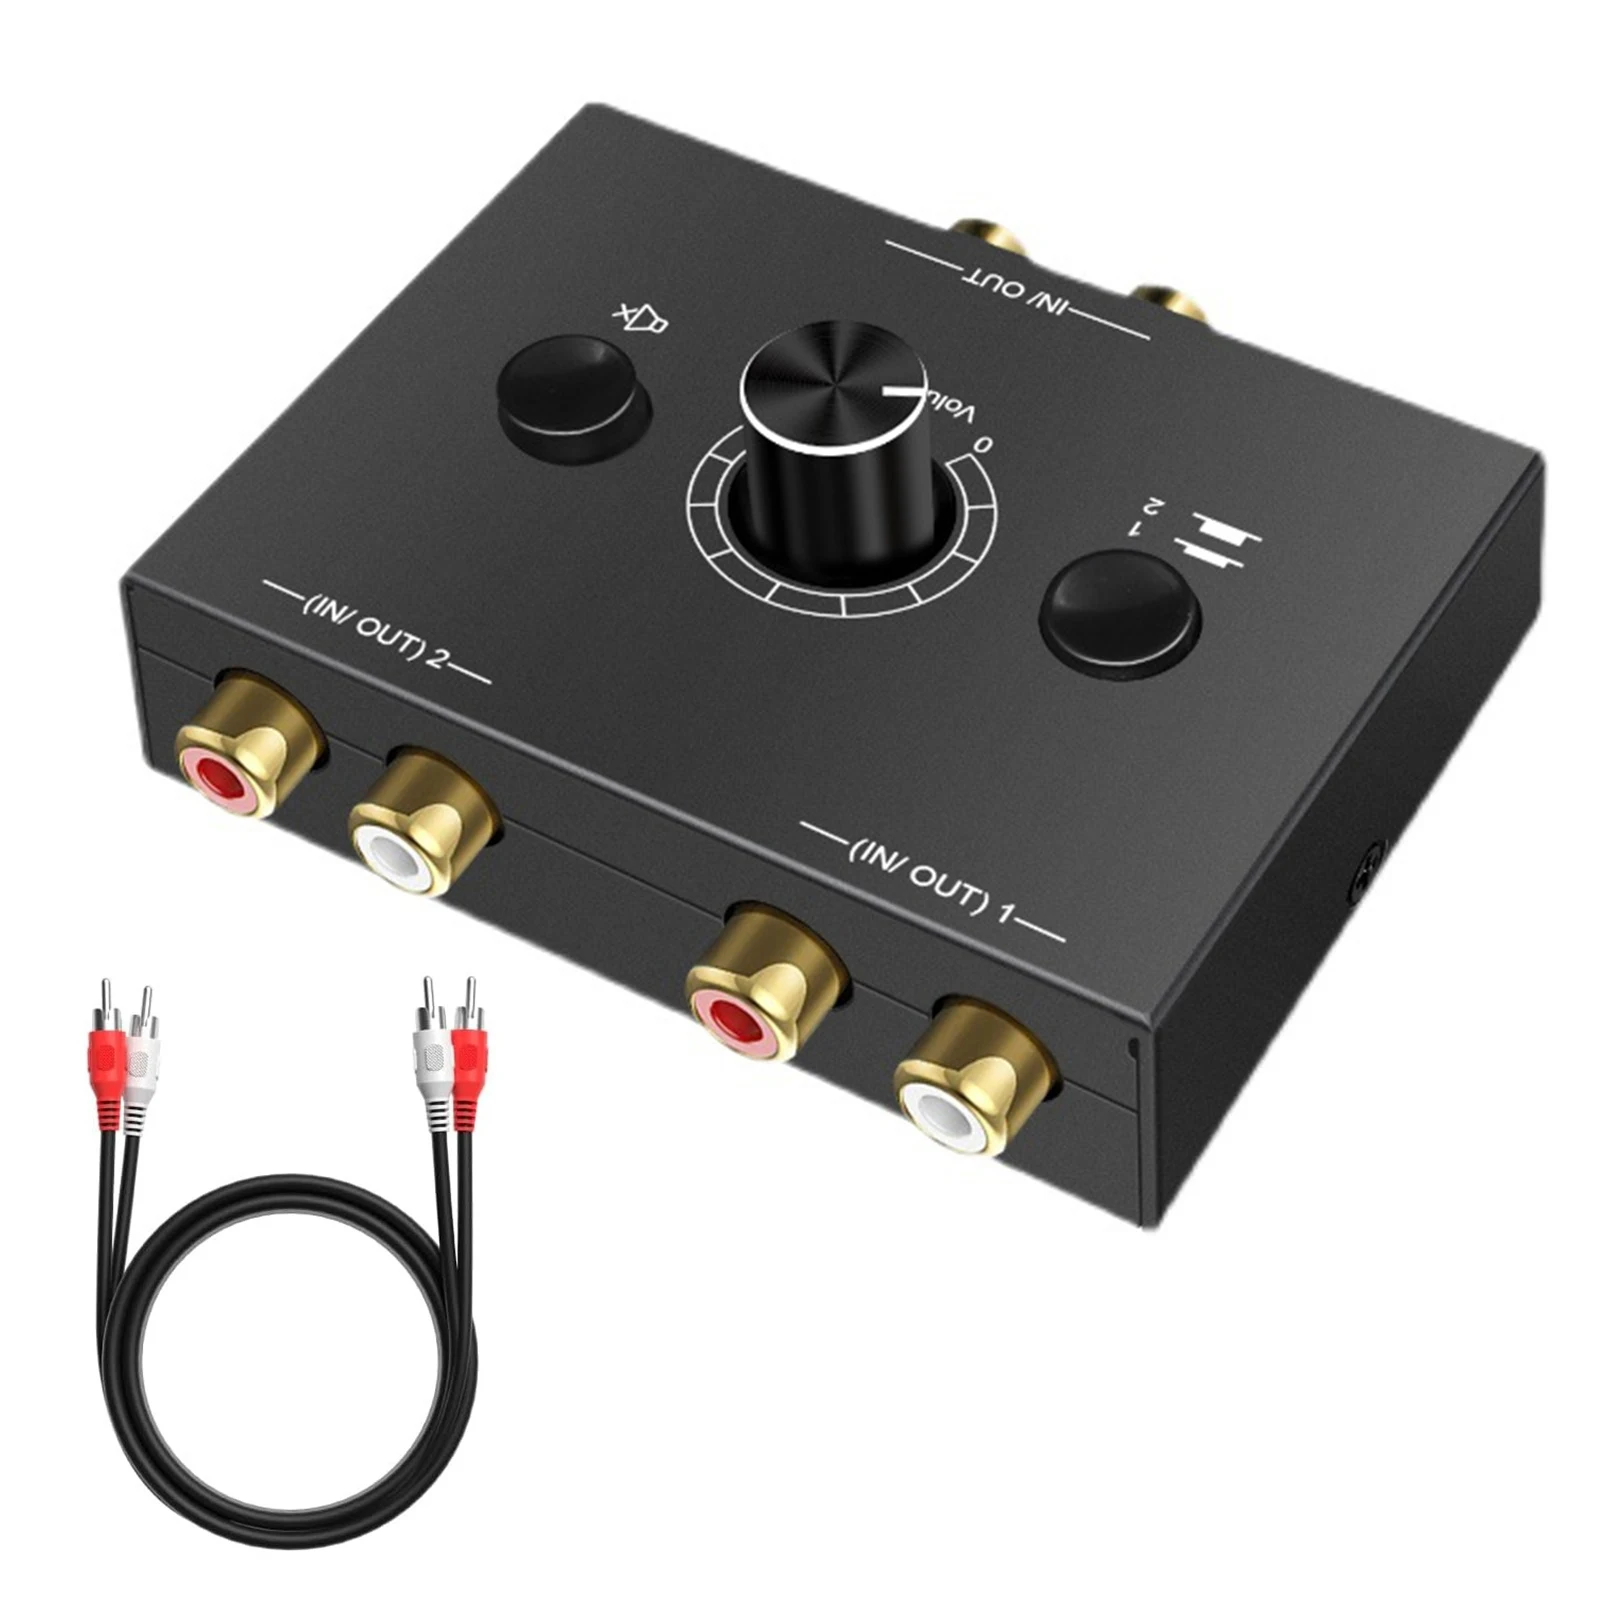 

2x1 / 1x2 L / R Stereo Audio Bi-Directional Switcher With Mute Button Portable RCA Stereo Audio Switch Audio Splitter Up to 8m